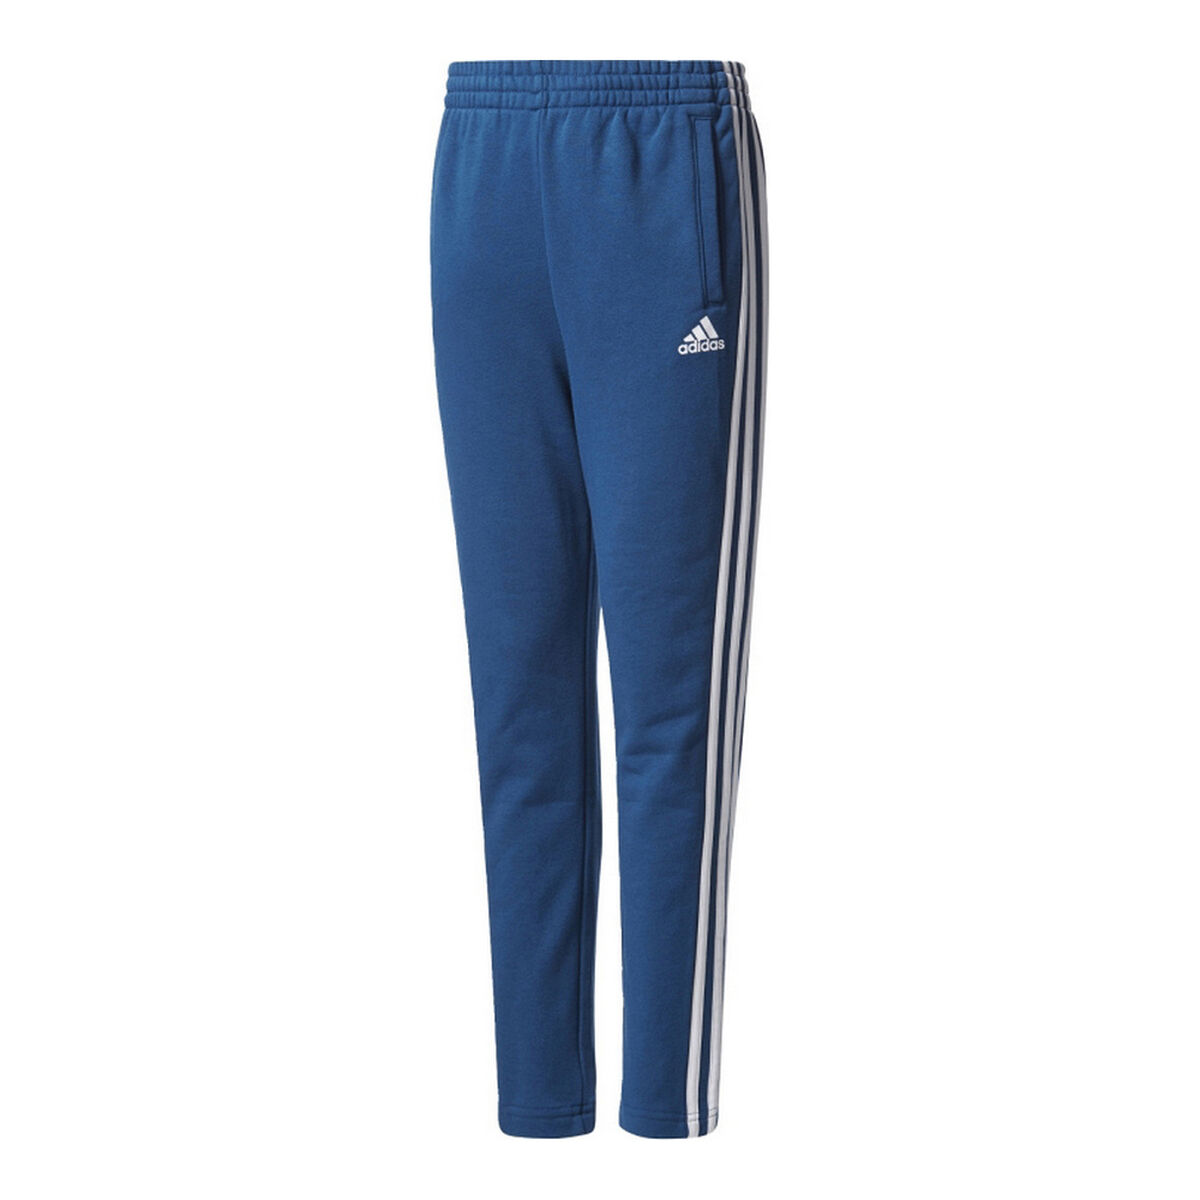 Children's Tracksuit Bottoms Adidas  YB 3S FT PANT CF2617 Blue 10 Years